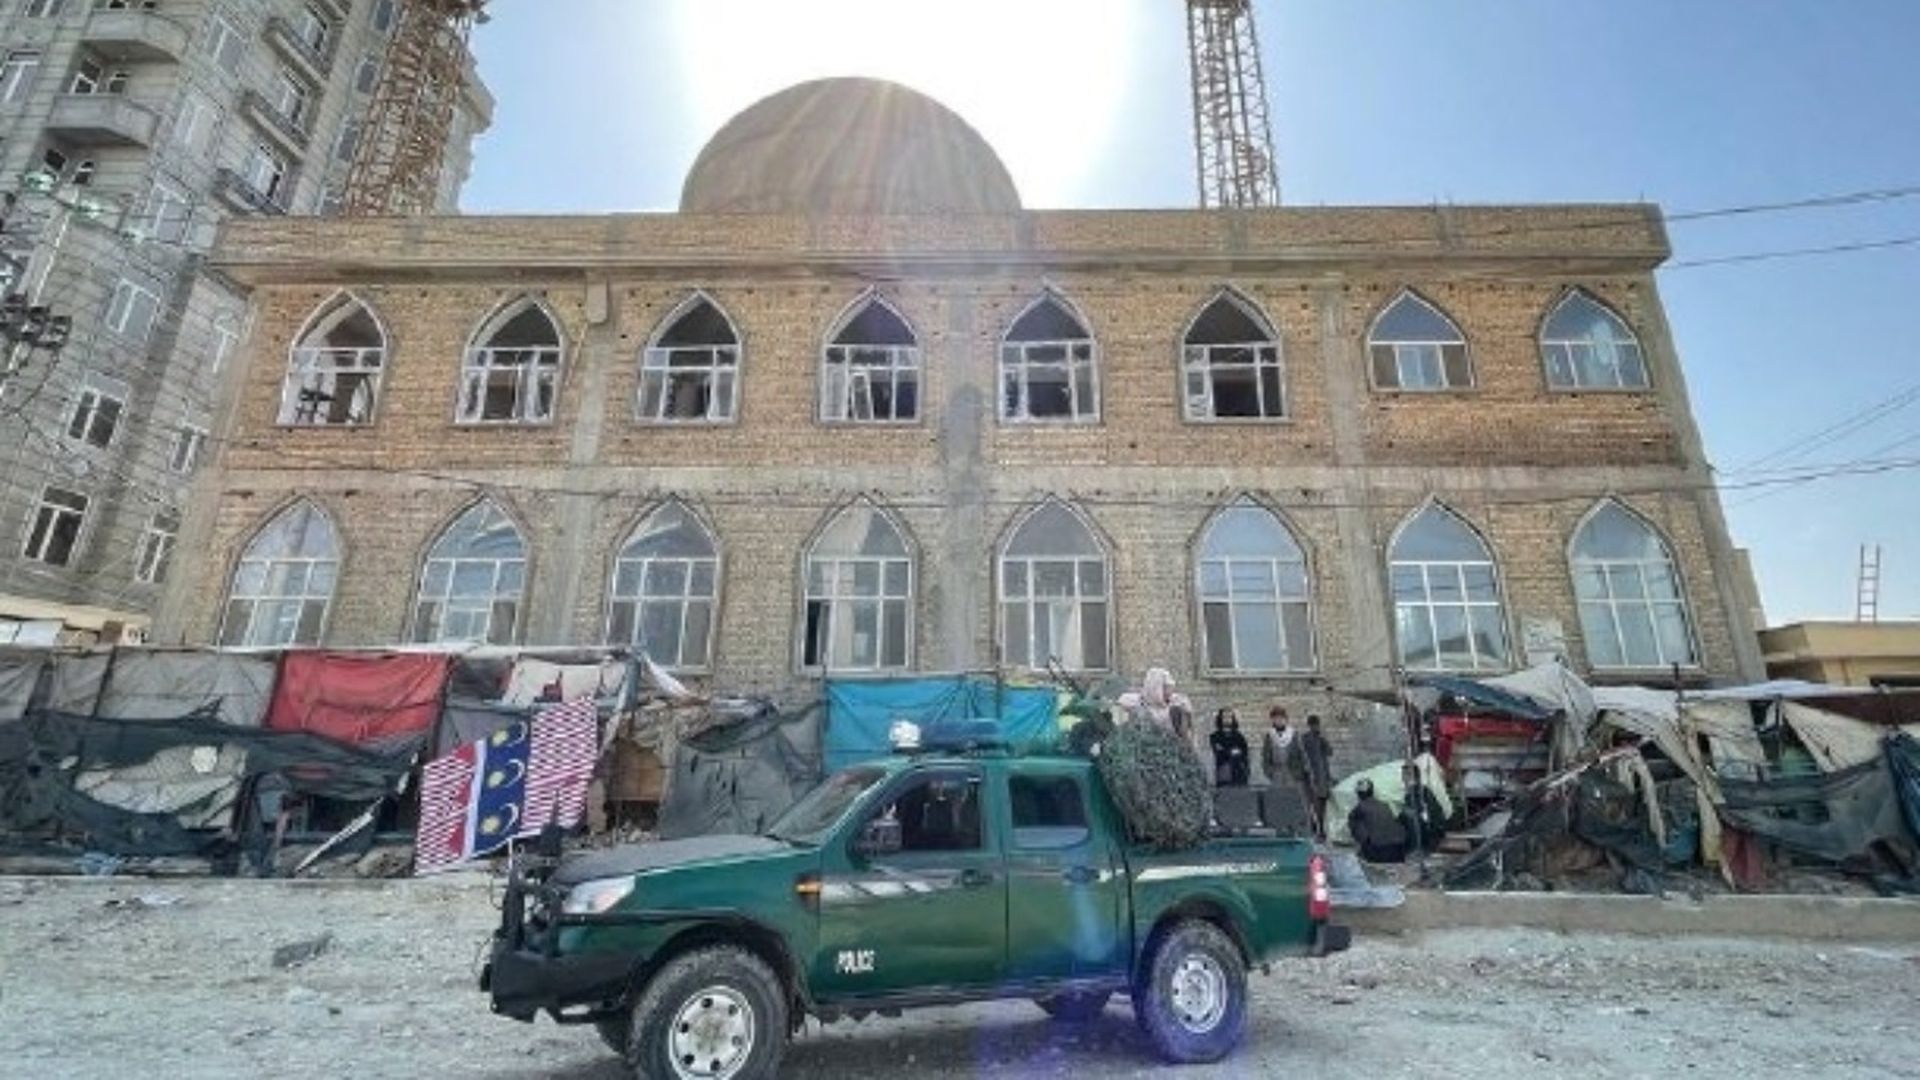 A view from the Seh Dokan mosque after a blast that hit the mosque located in a busy area of Mazar-i-Sharif, Afghanistan April 21, 2022. 